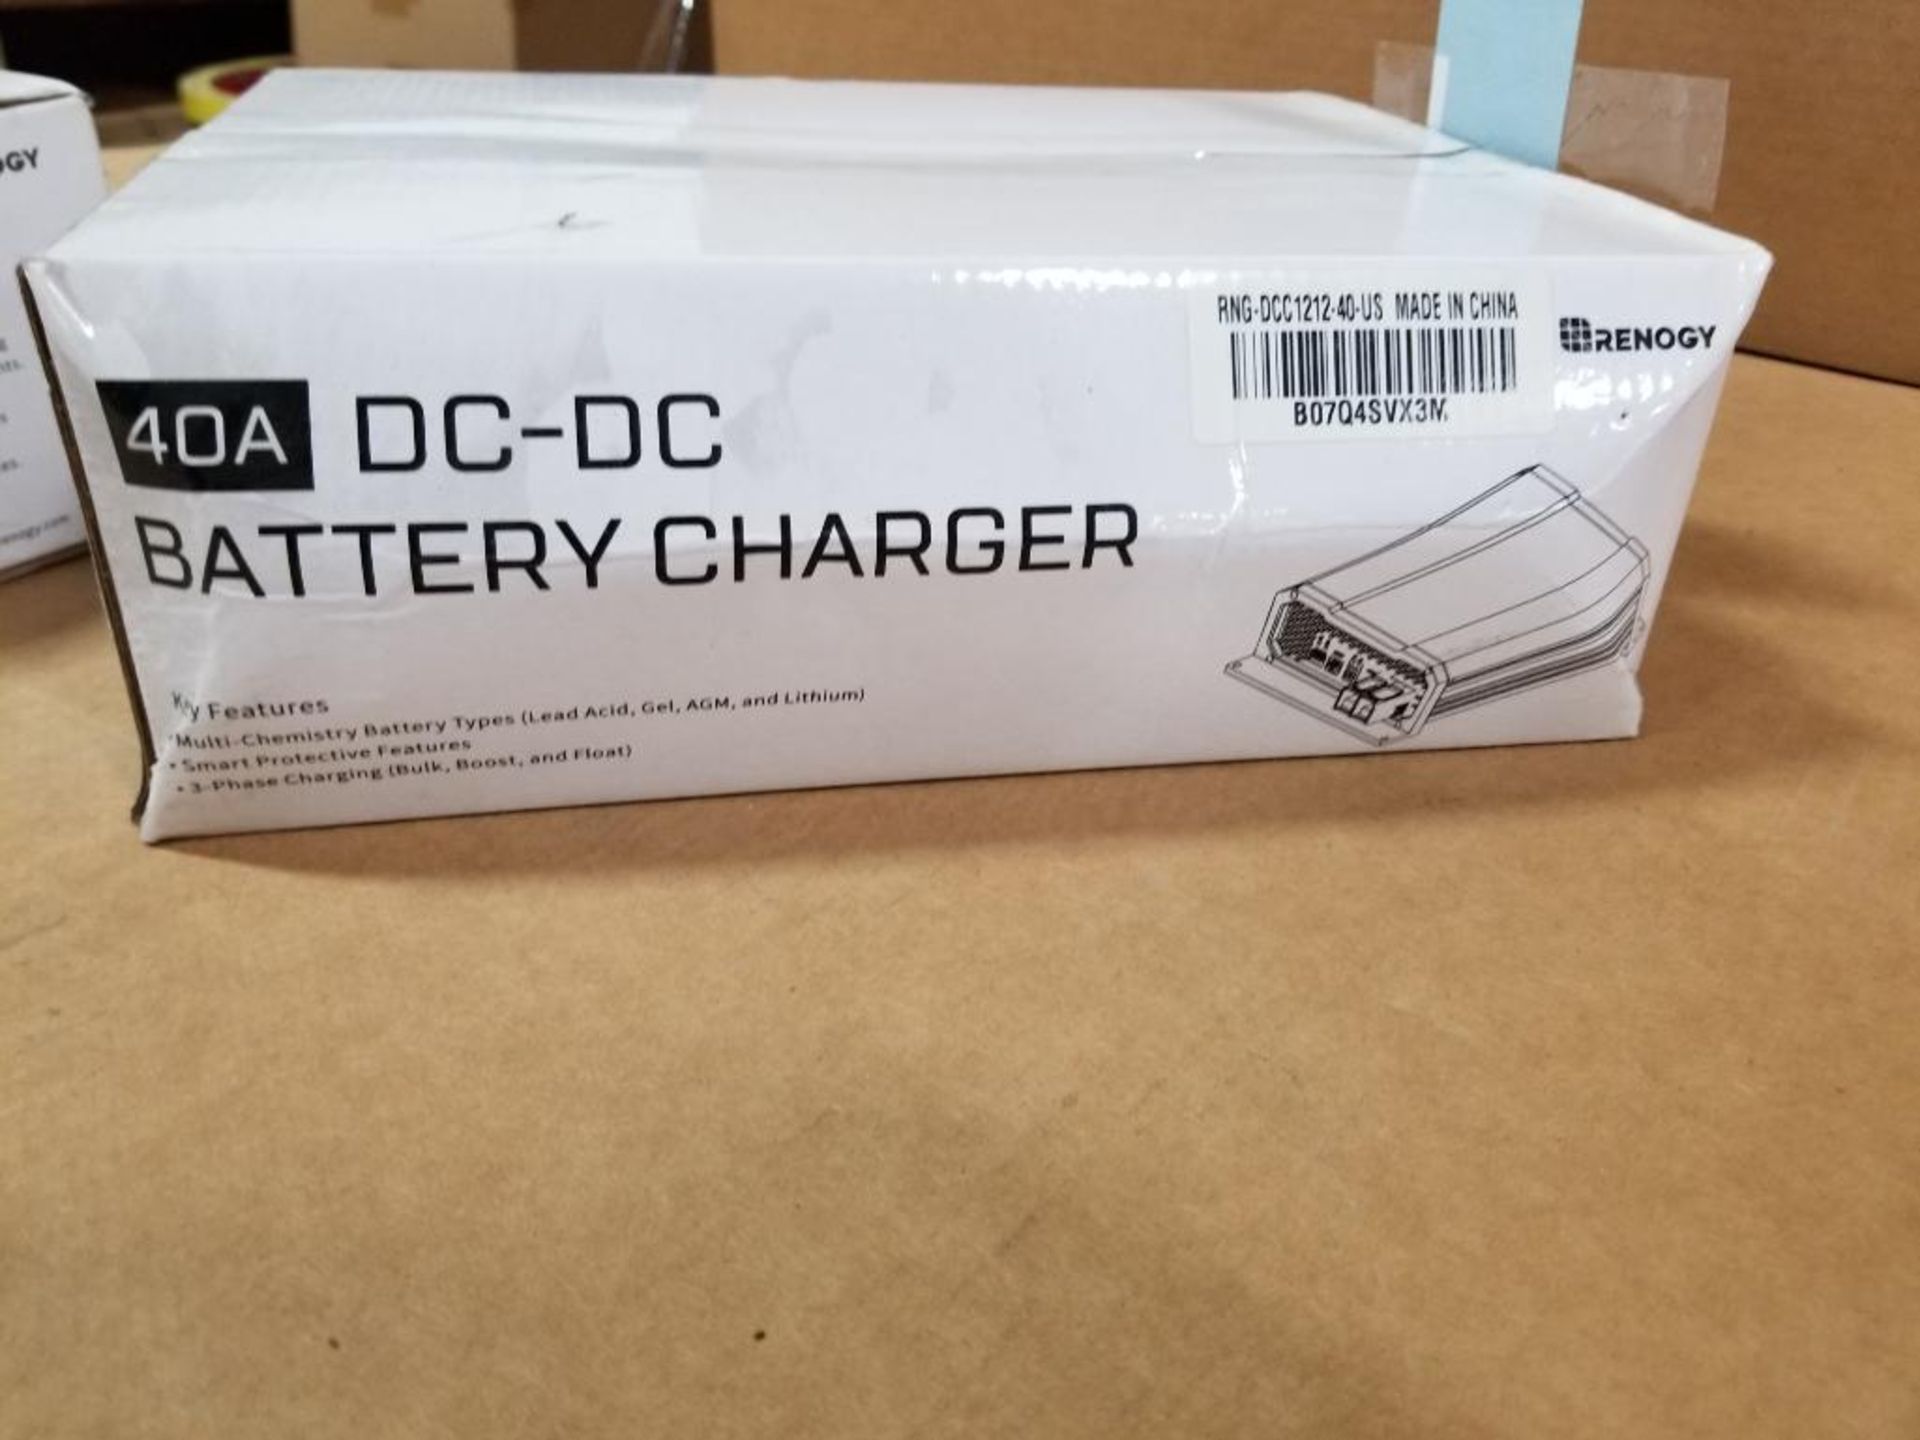 Qty 2 - Renogy 40A DC-DC battery charger. RNG-DCC1212-40-US. - Image 5 of 5